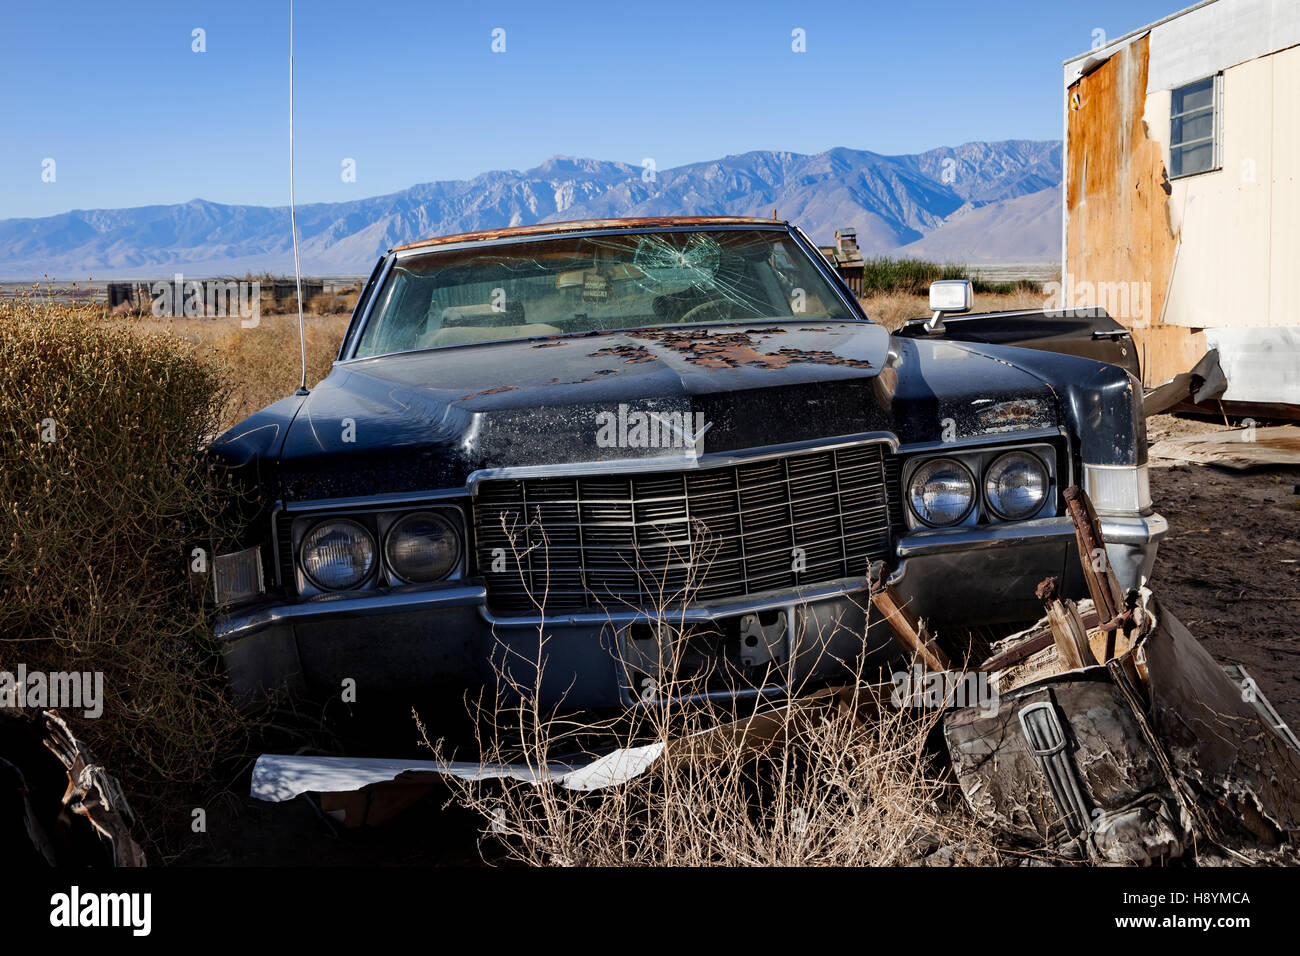 Derelict Cadillac sits in the town of Keeler in California's Owens Valley Stock Photo